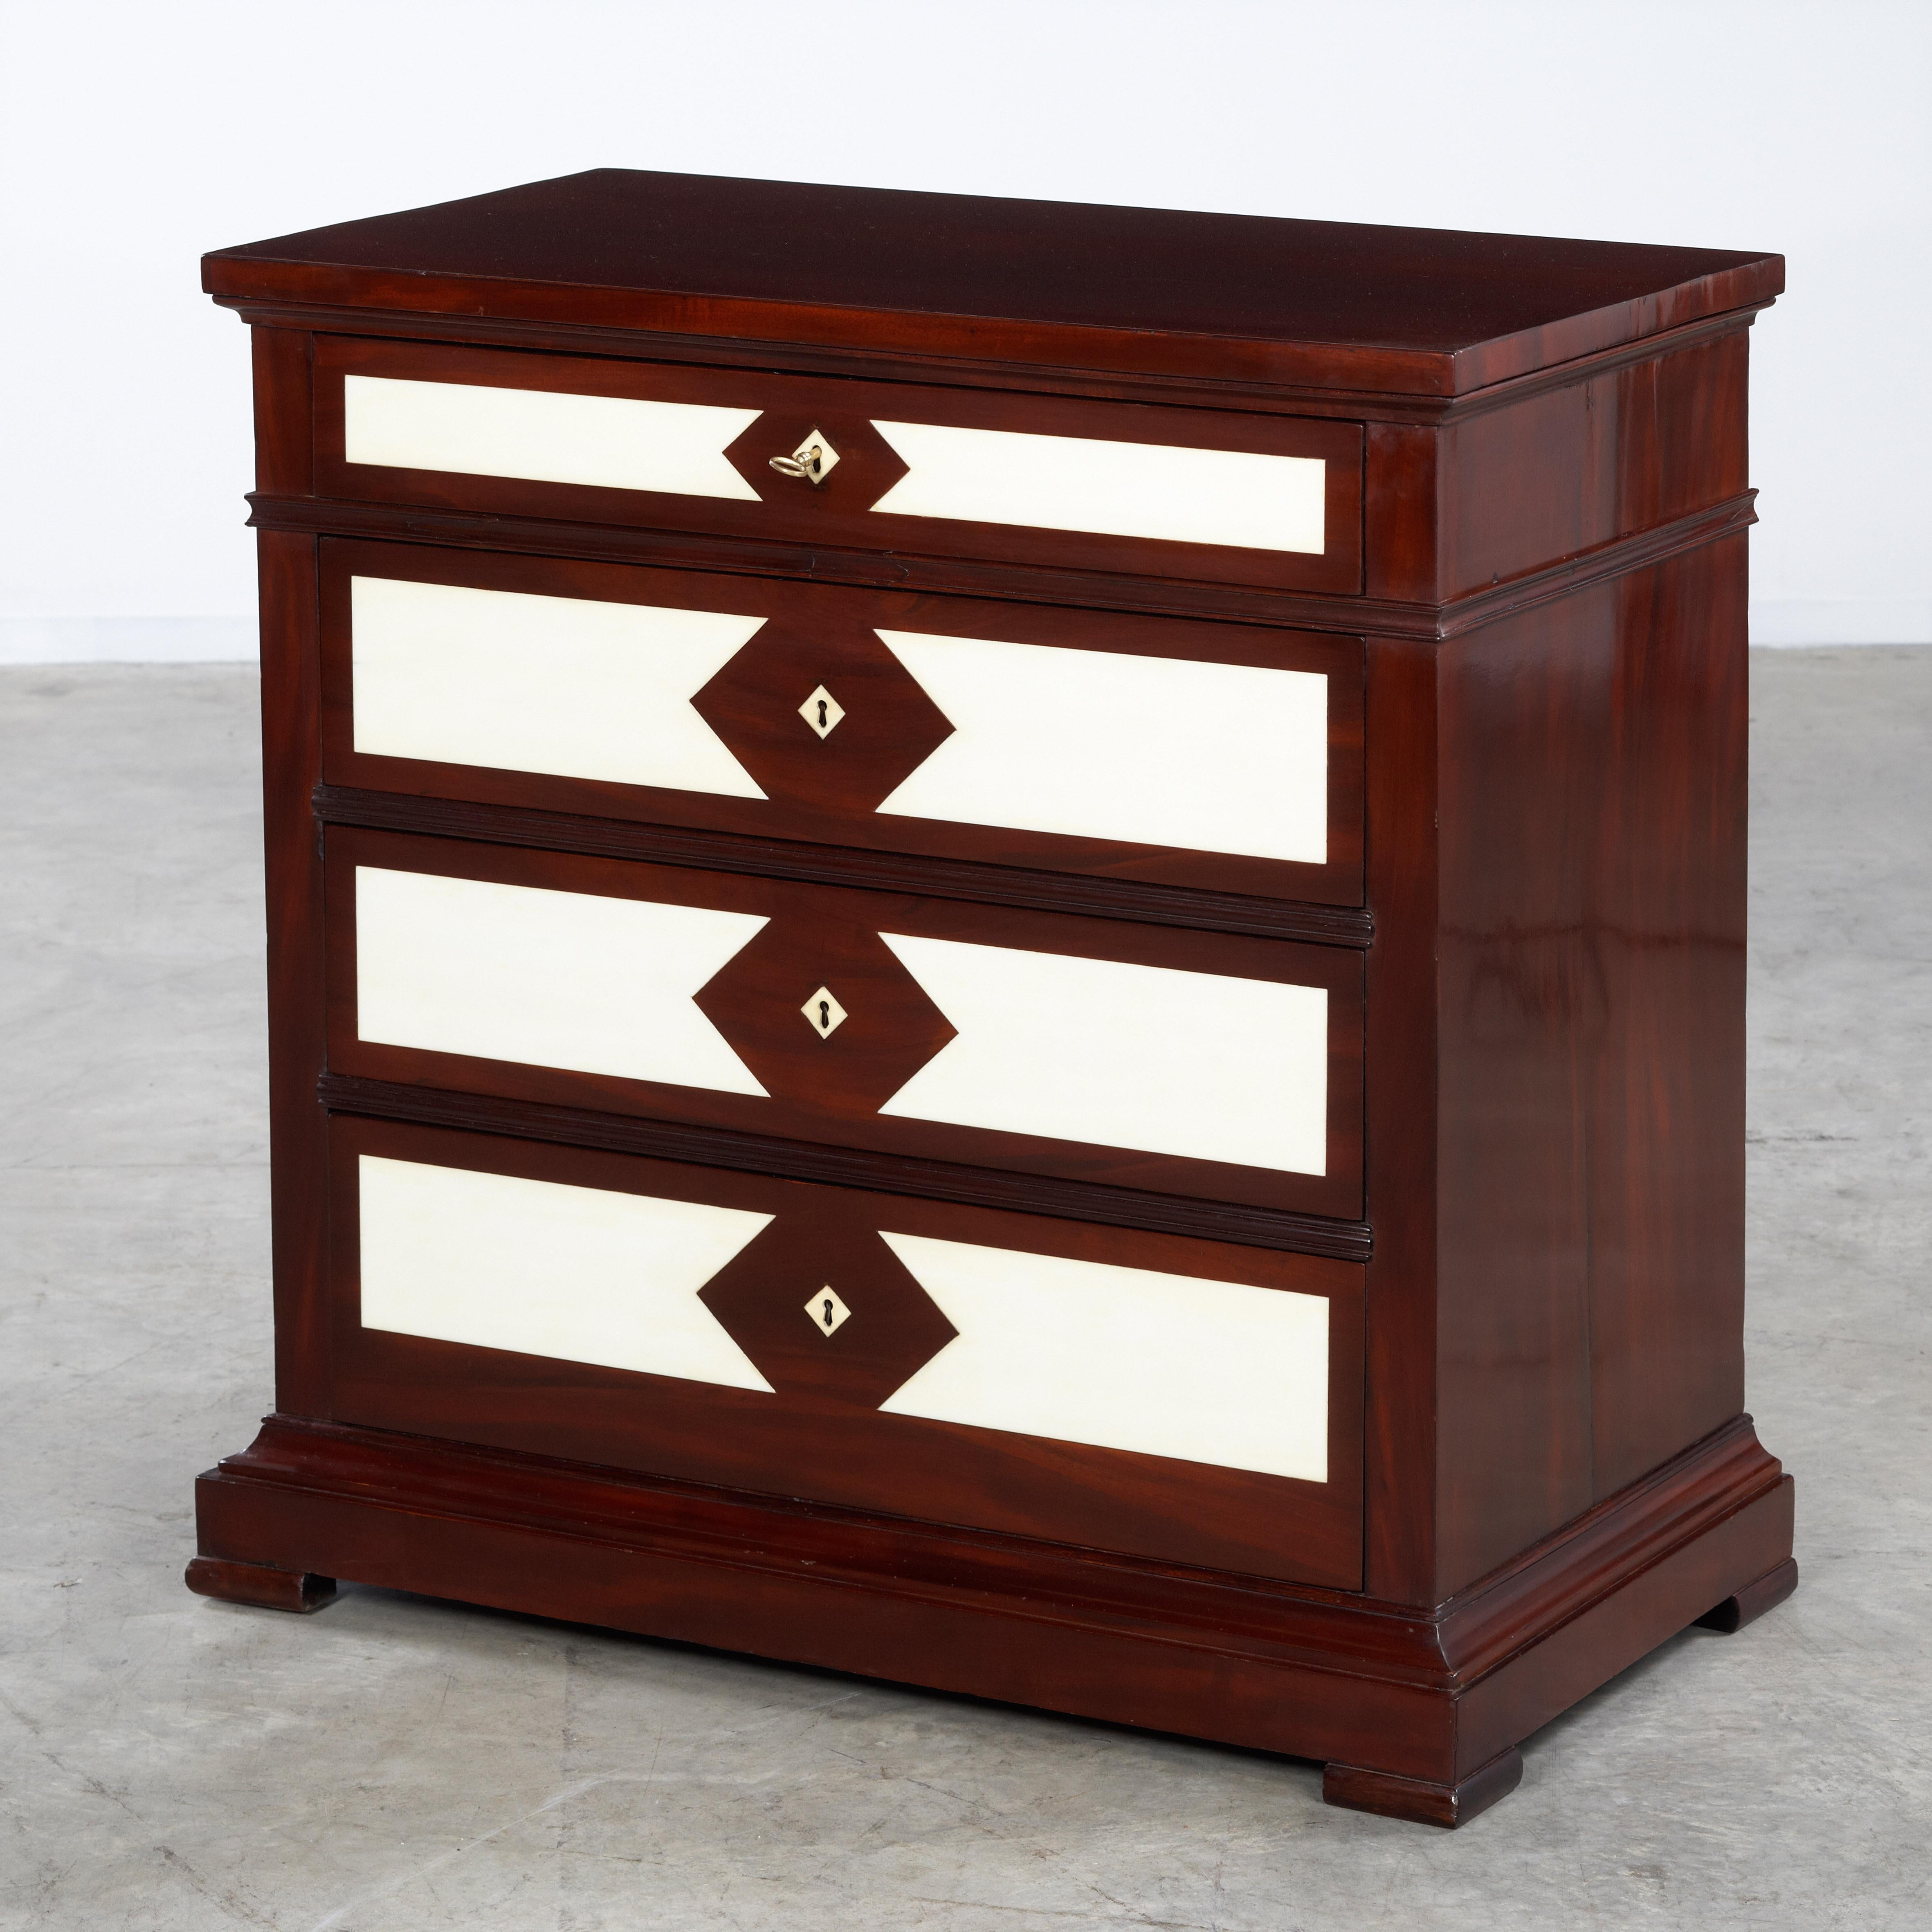 Very special late Empire chest of drawers with opaline glass inlay, 19th century, Denmark, 1830.  Mahogany with Ivory colored glass inlay.  Having four drawers with working locks, 1 key.   Beautifully proportioned chest of drawers with brilliant